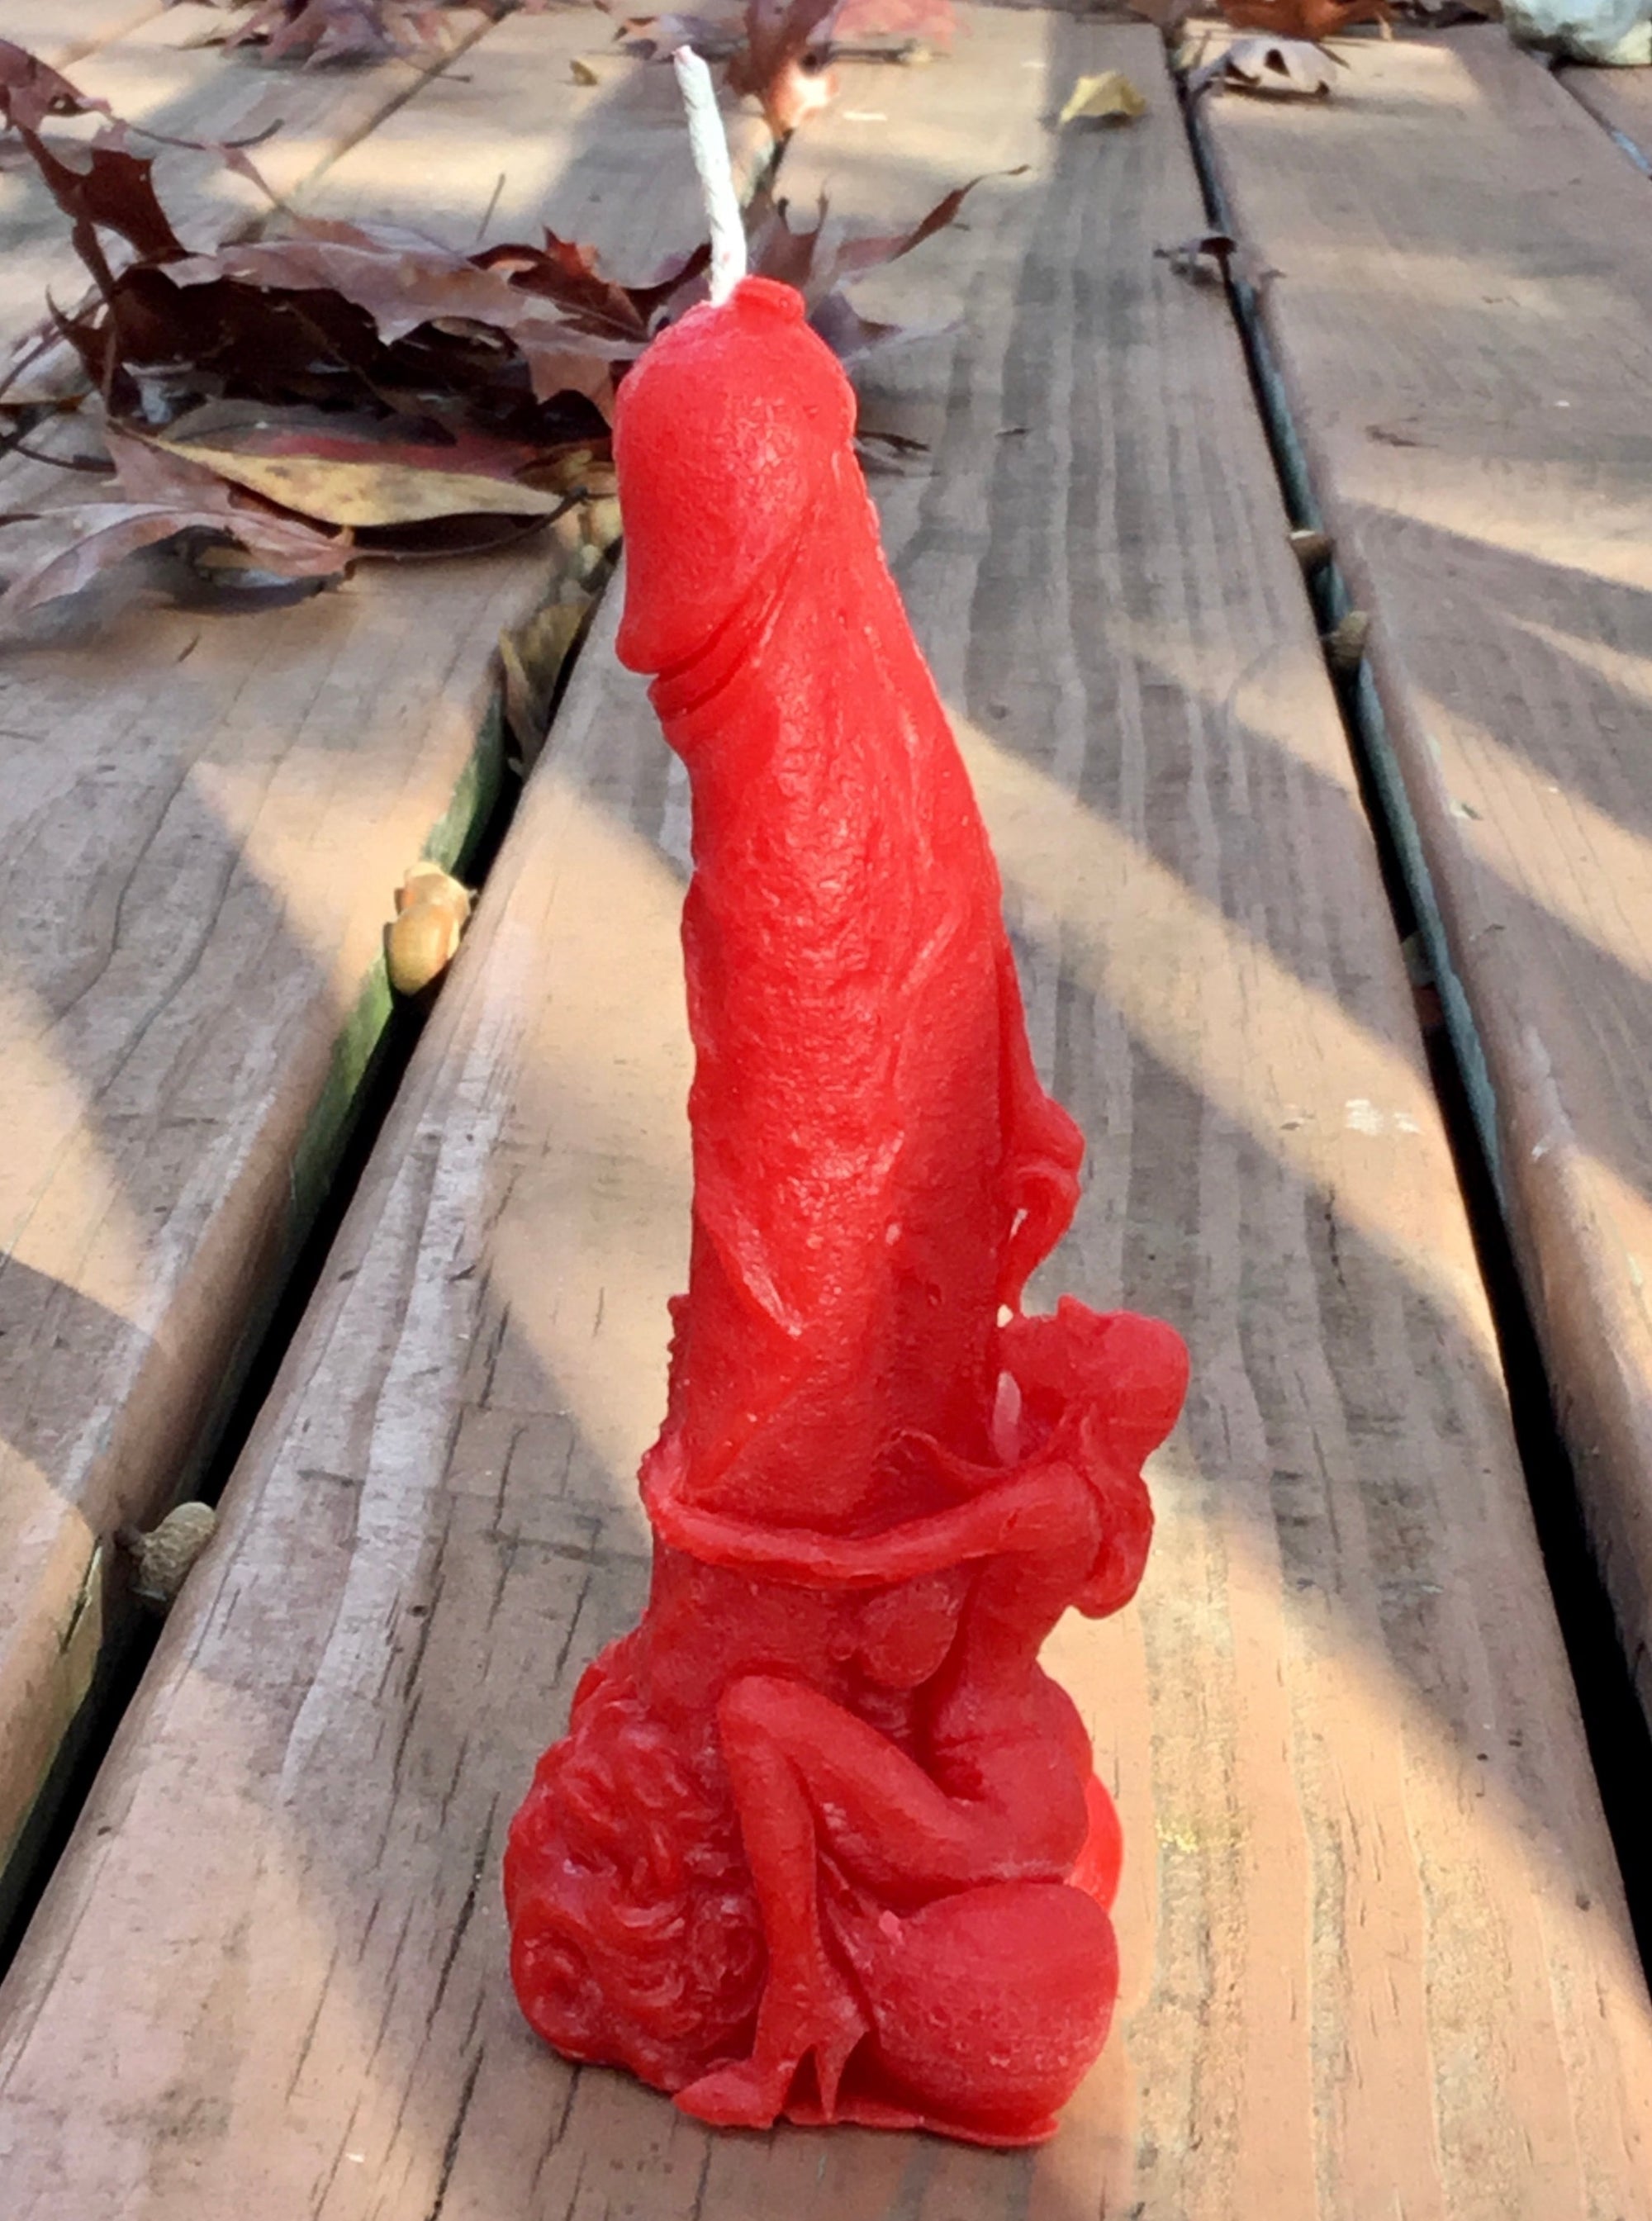 Penis candle phallus candle sex magick